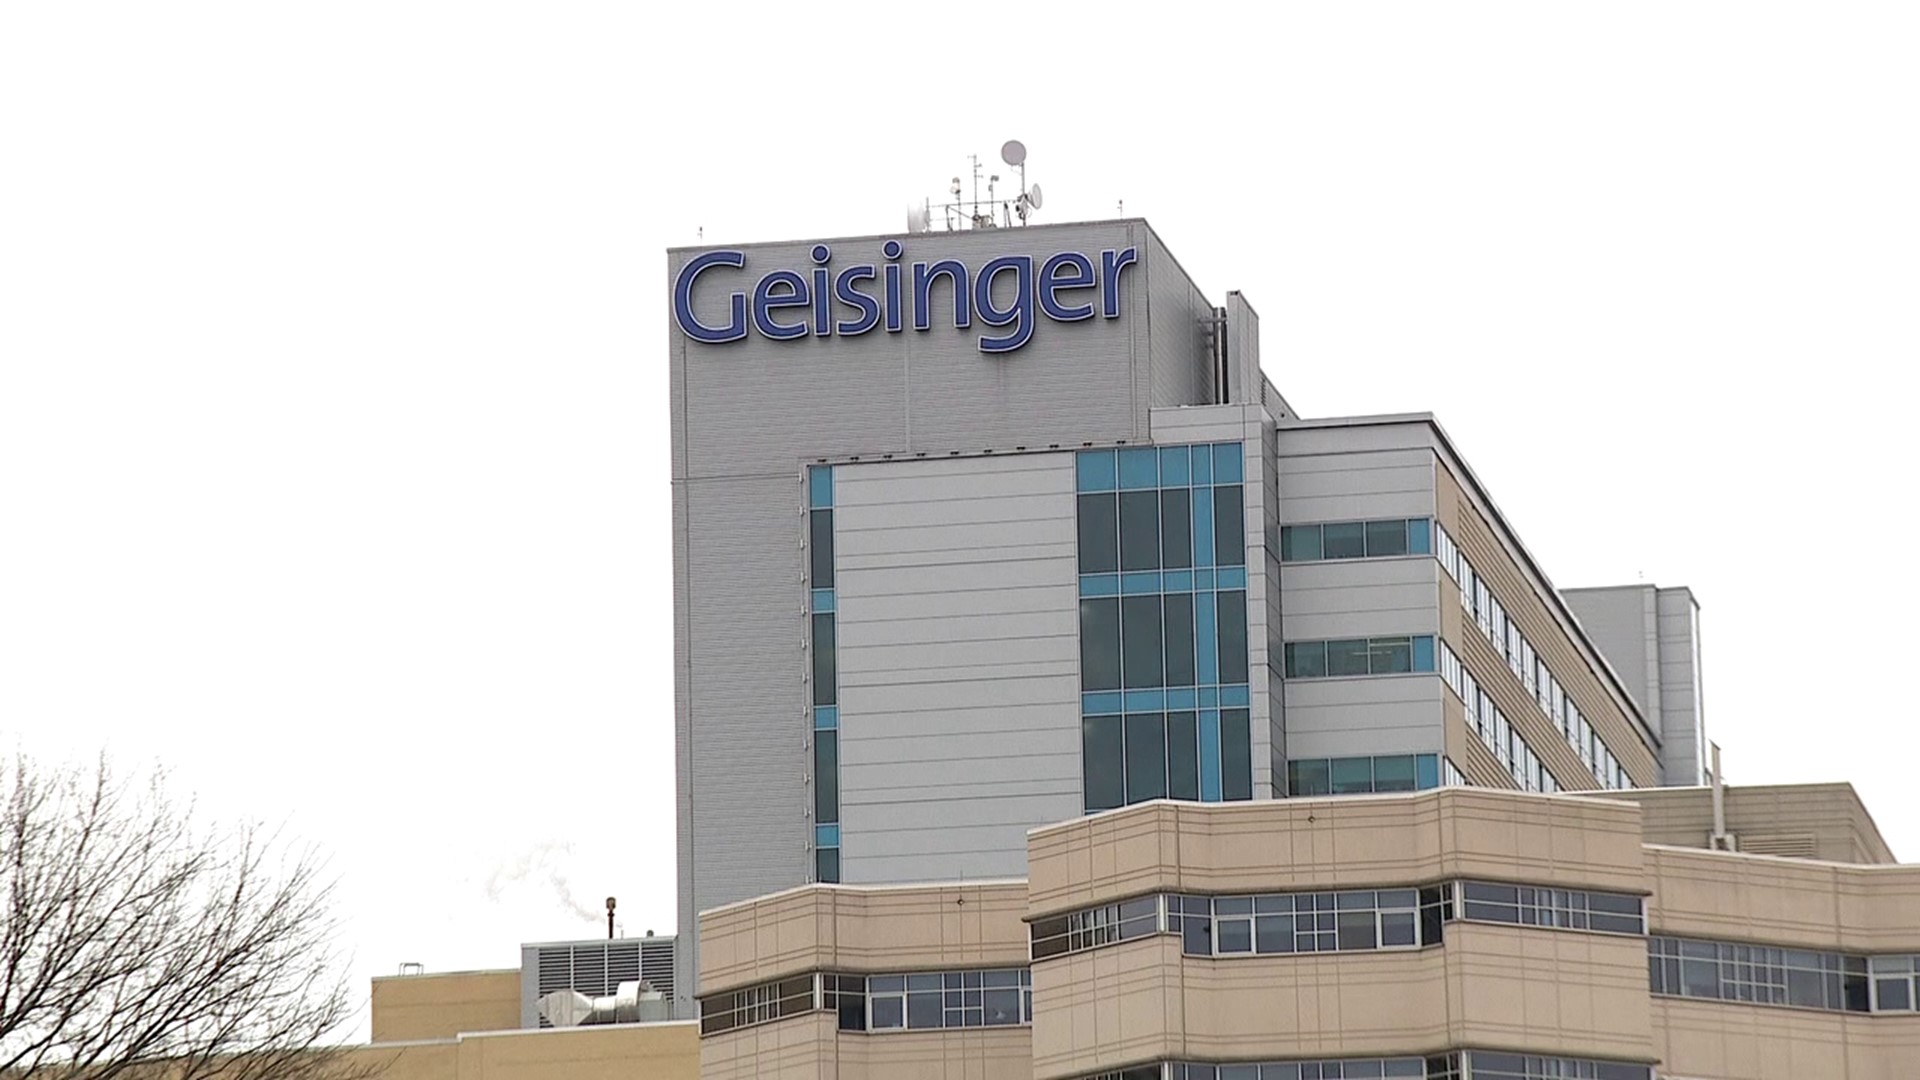 Geisinger confirms it is seeing an increase in COVID-19 cases since the holidays.